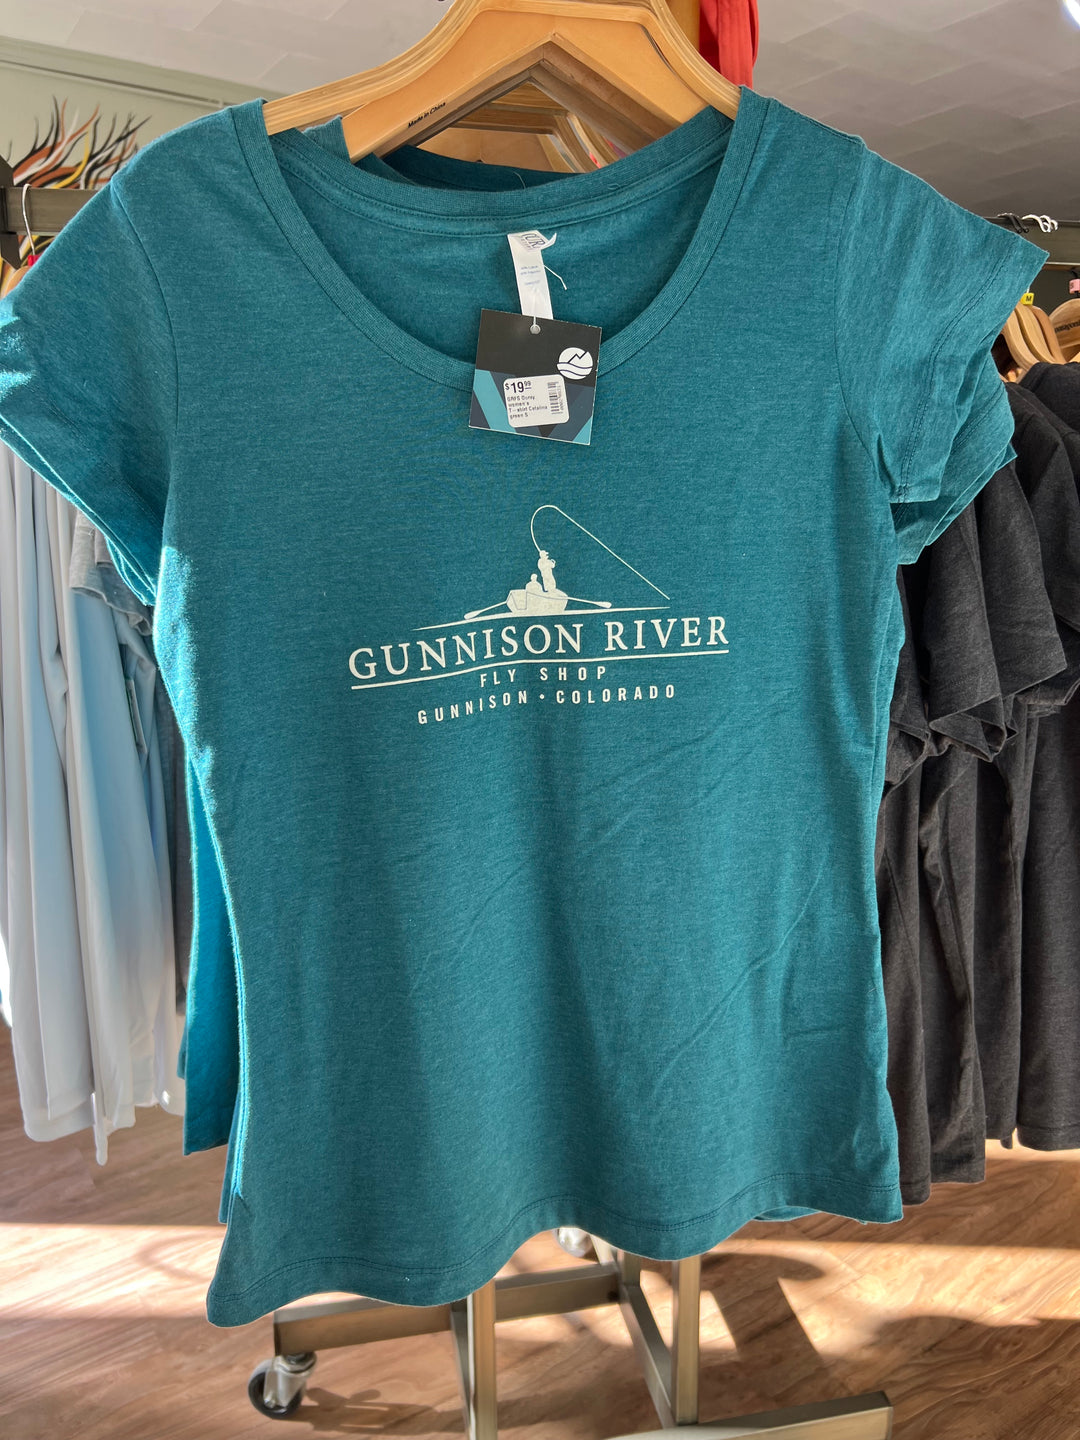 GRFS Ouray women's T-shirt Catalina green and Charcoal